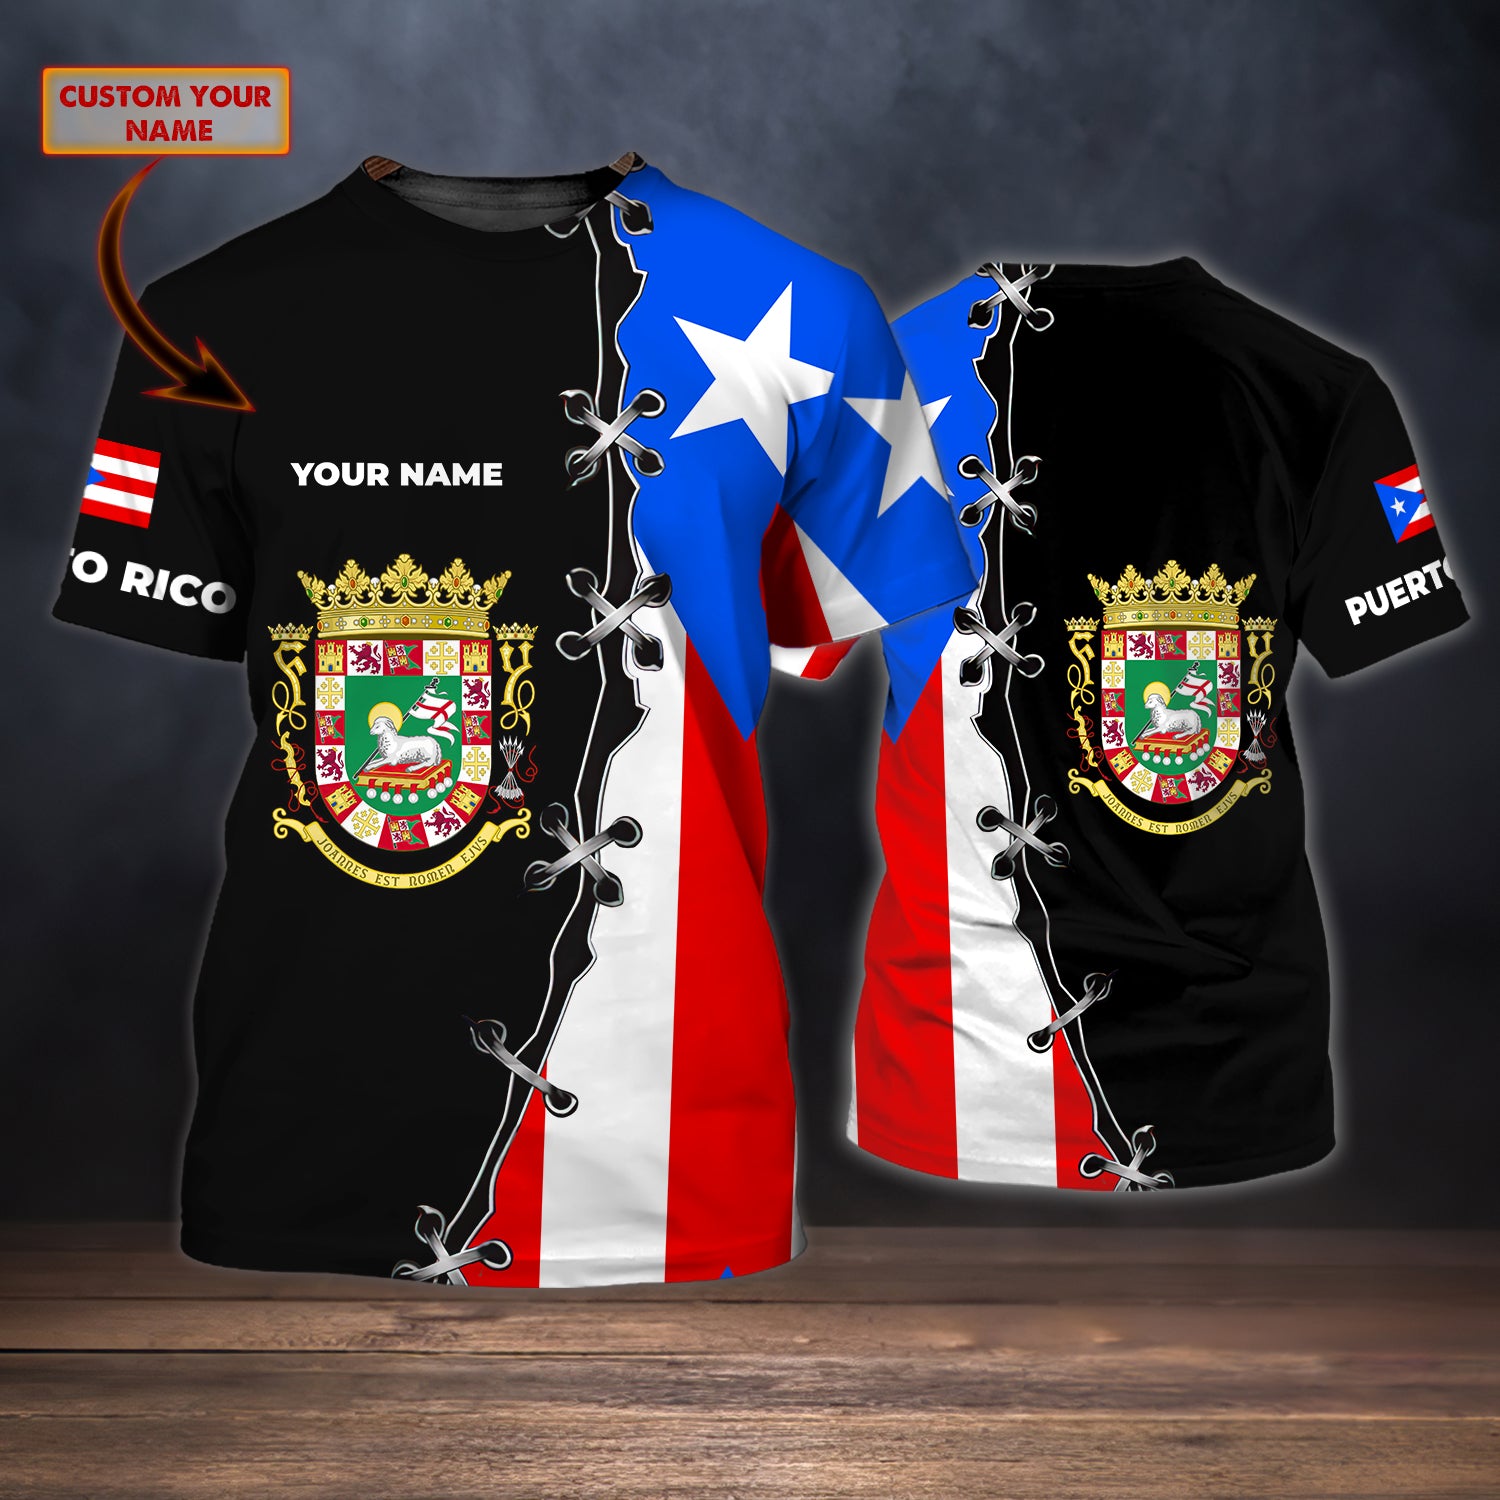 PUERTO RICO 3979 - Personalized Name 3D T Shirt - NBTT